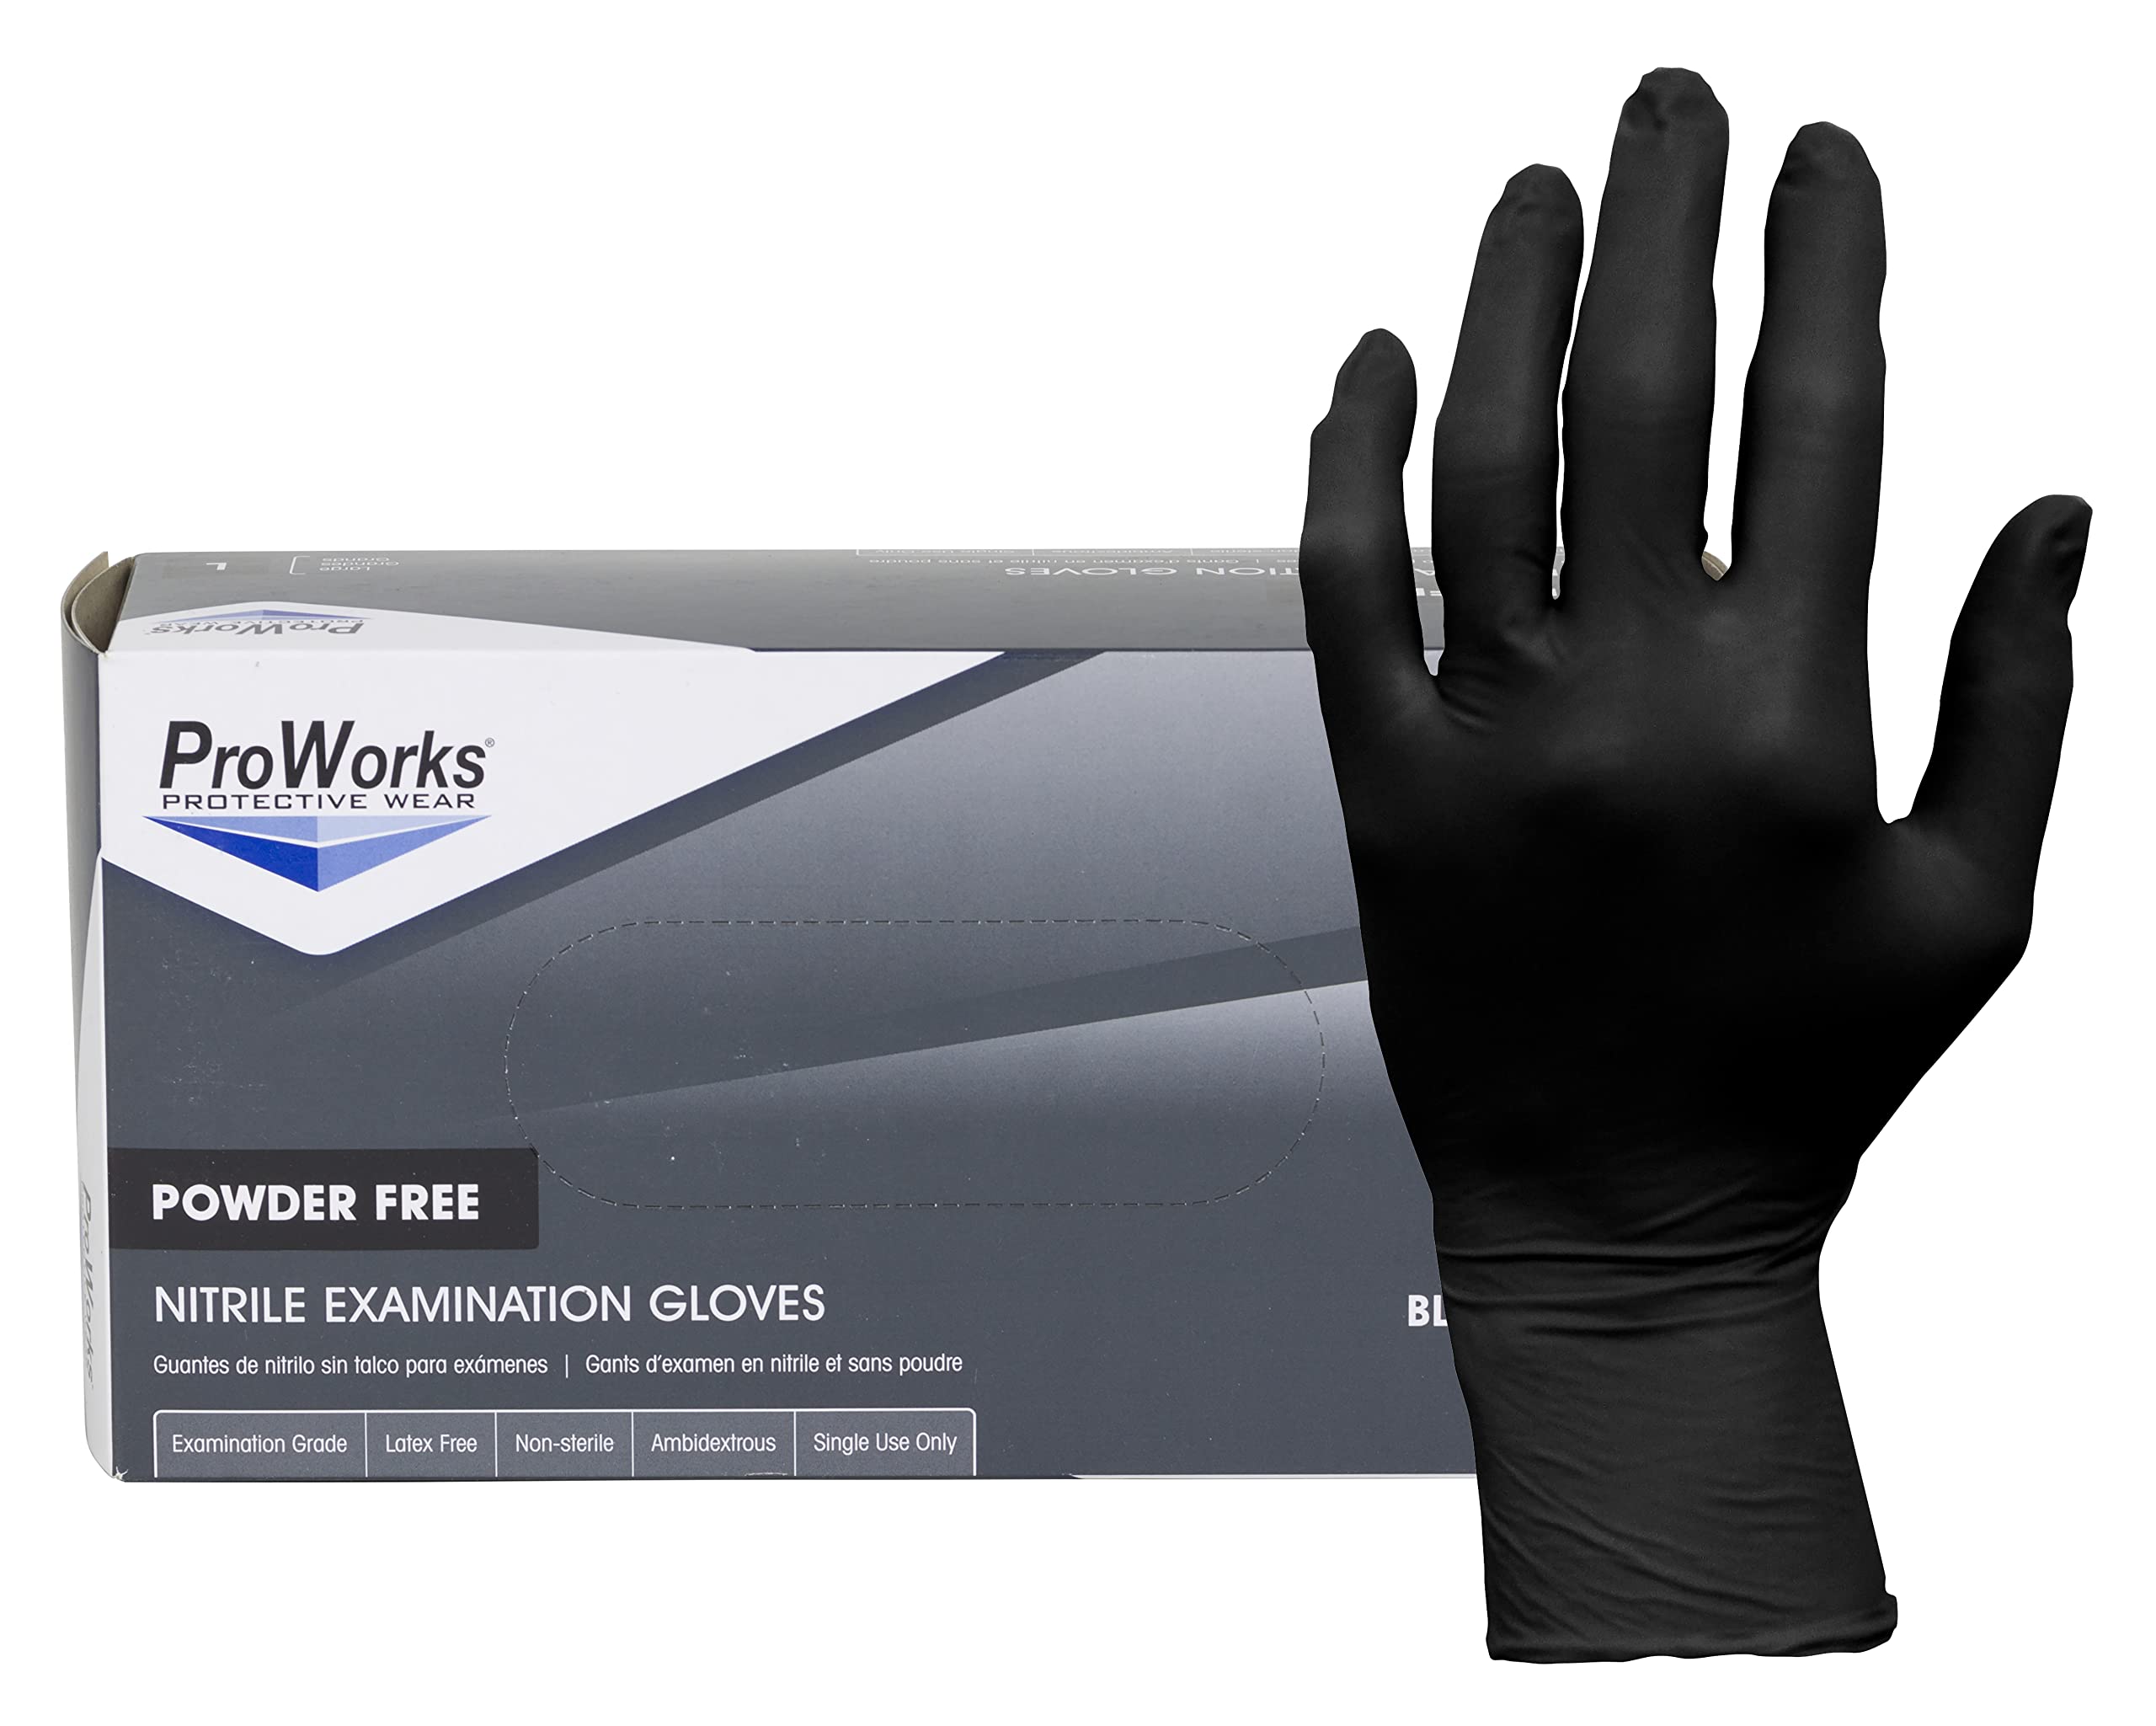 Product VGLOVE-L: NITRILE POWDER FREE LARGE EXAM GLOVES 100/10 5 MIL